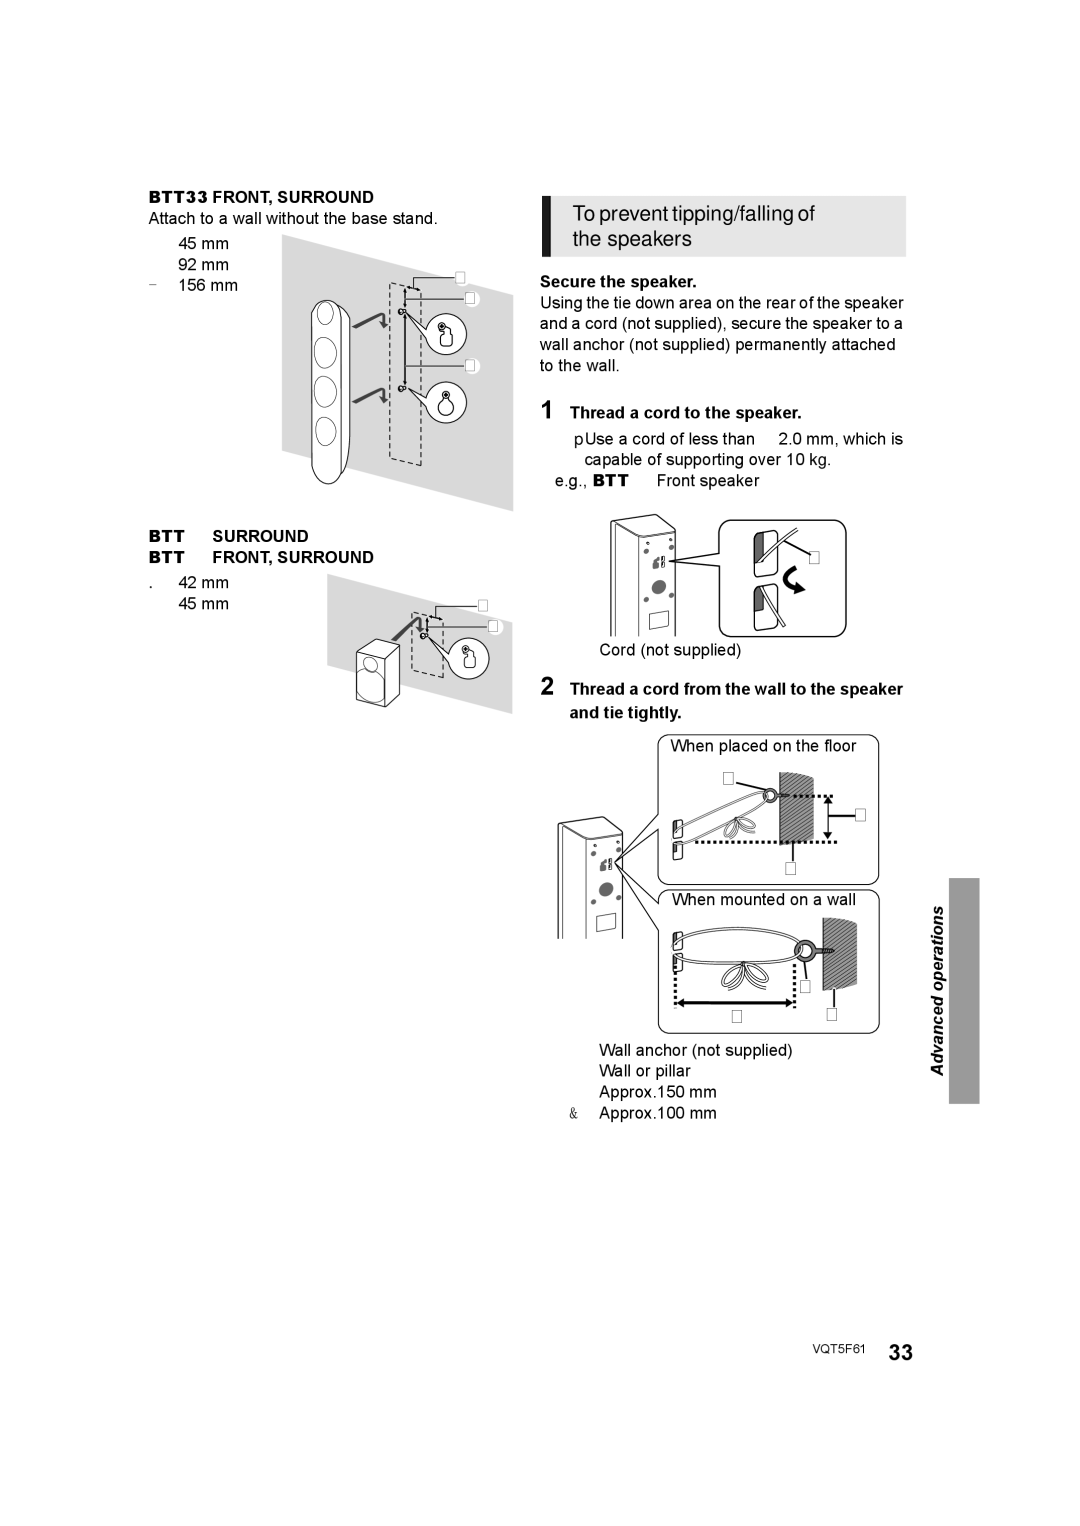 Panasonic SC-BTT465, SC-BTT405, SC-BTT785, SC-BTT433 owner manual To prevent tipping/falling, Speakers 